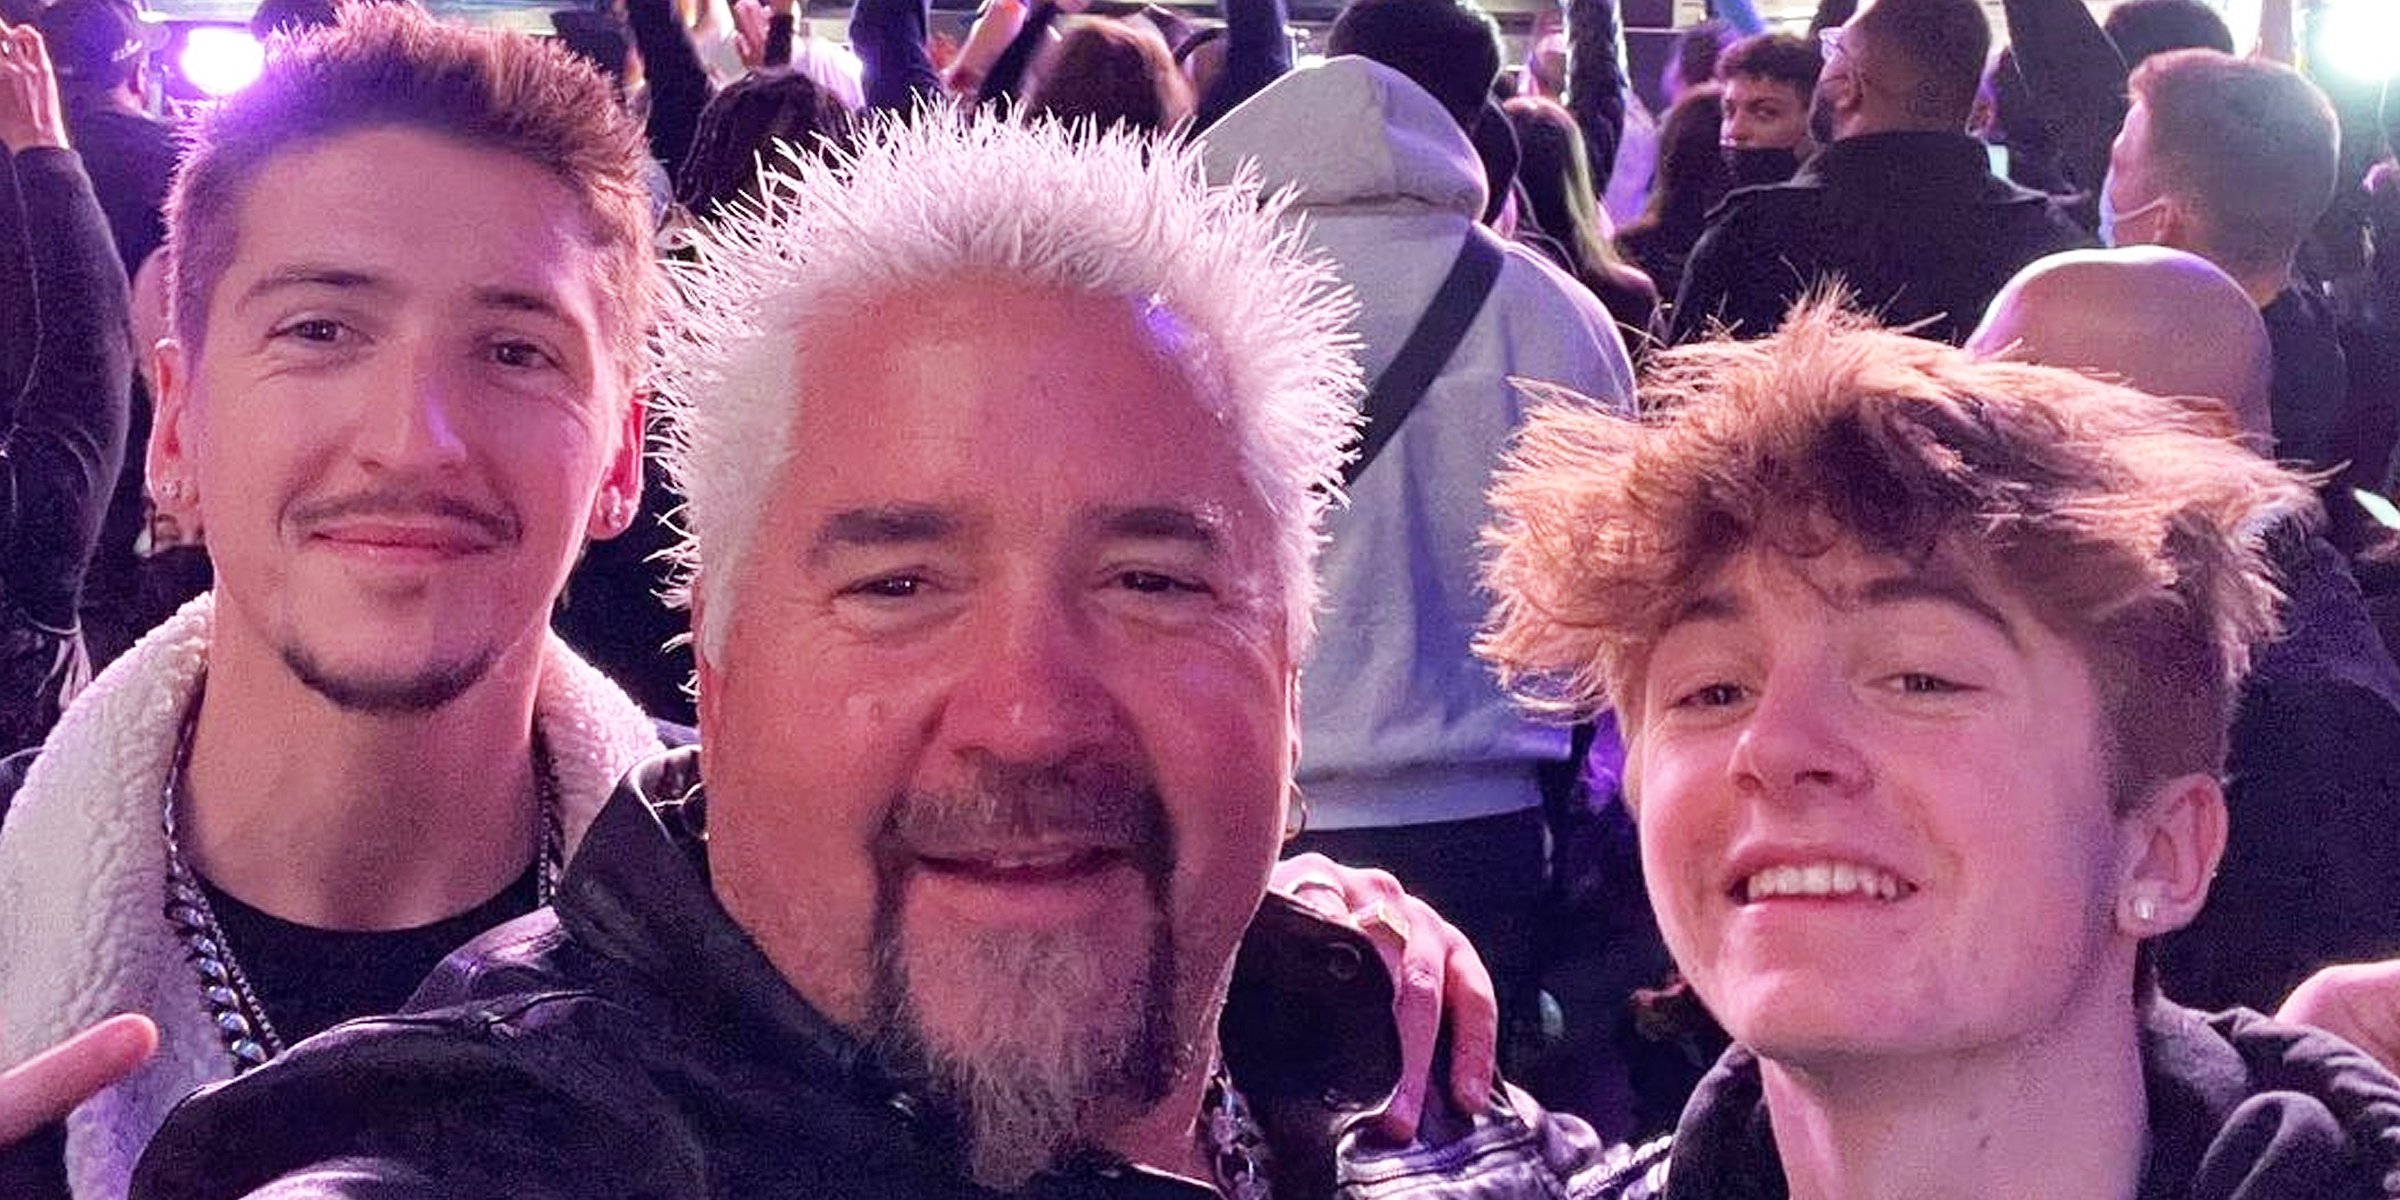 Guy Fieri Posing with Sons Hunter and Ryder at a Concert | Source: Instagram/guyfieri